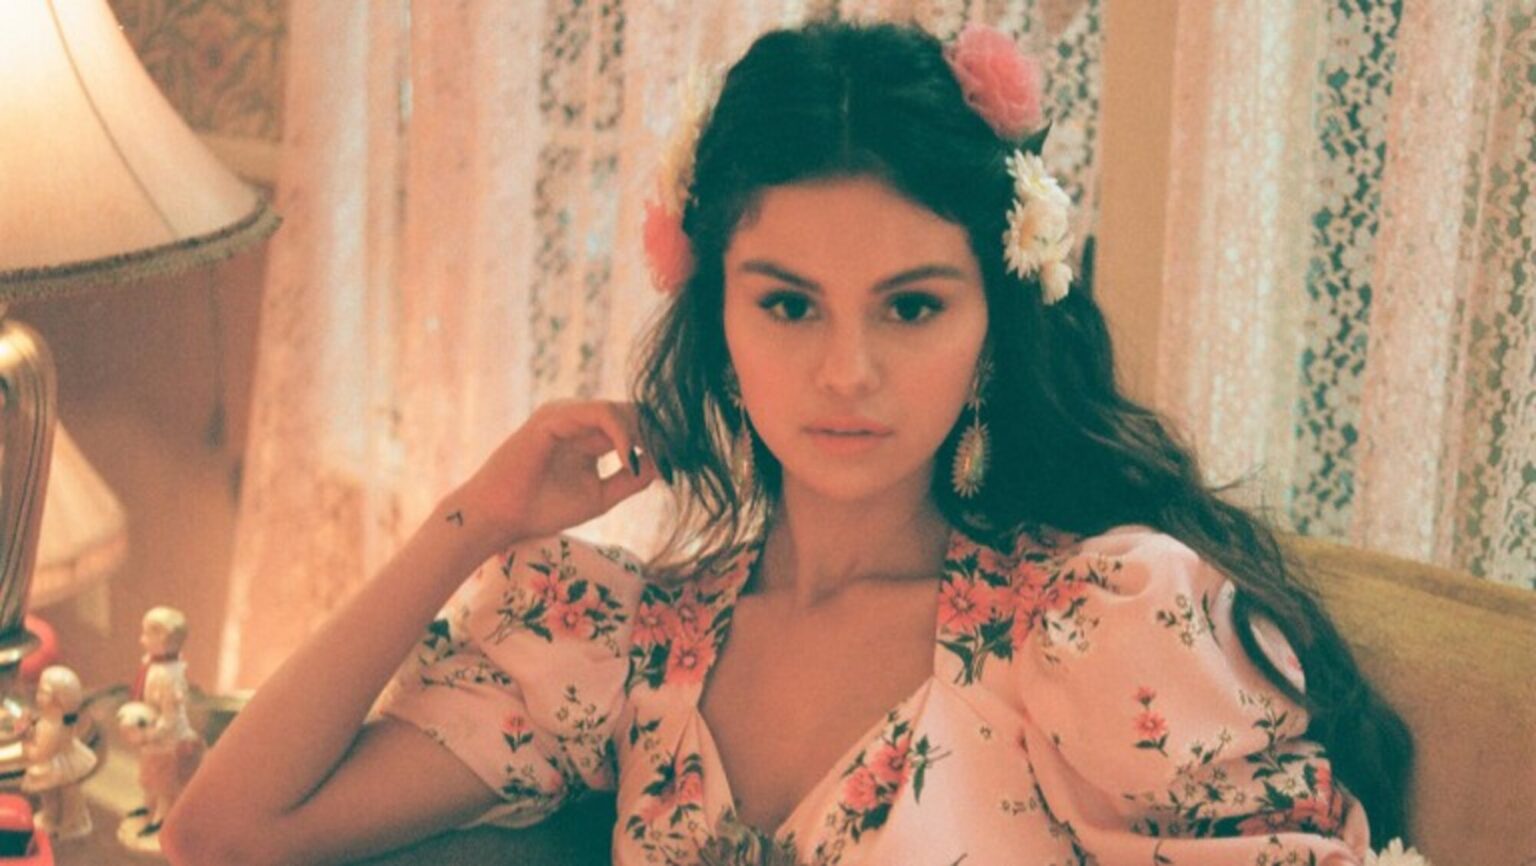 Selena Gomez has one of the largest Instagram followings ever, how much is she making from her posts? Discover just how rich the "Bad Liar" singer is.